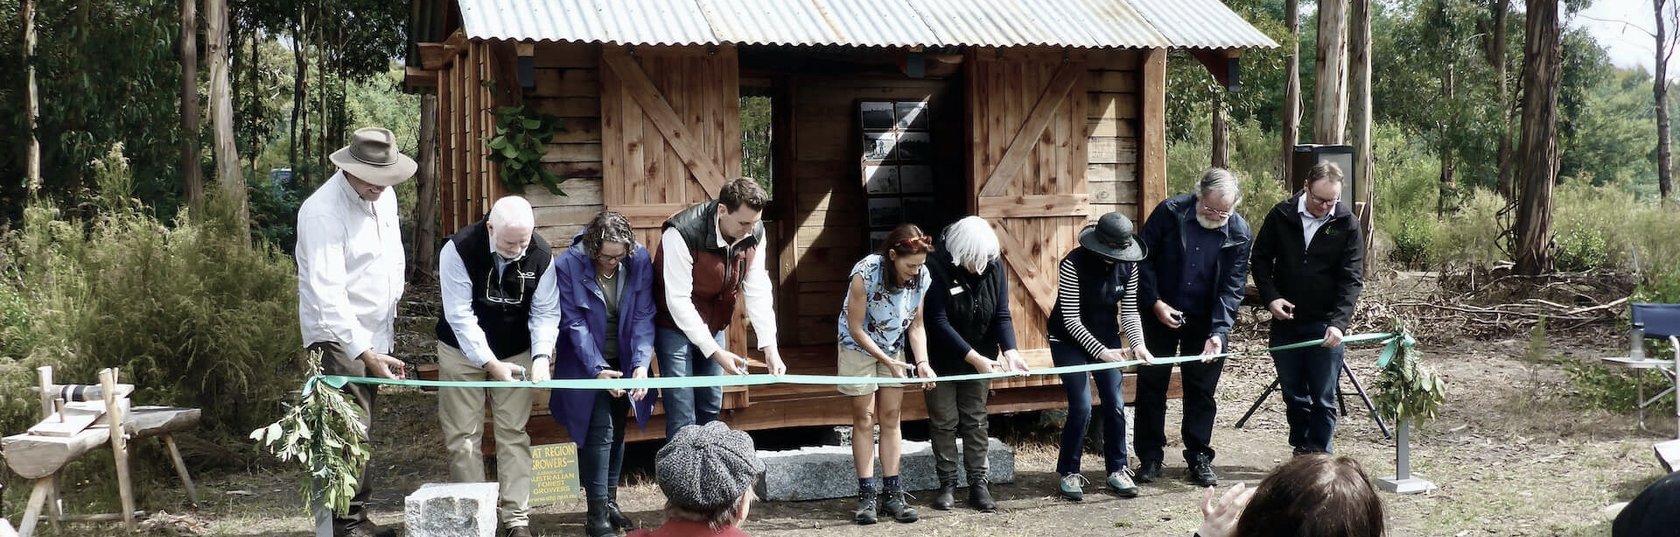 Slab hut launch: economic advantages to grow local for forest communities